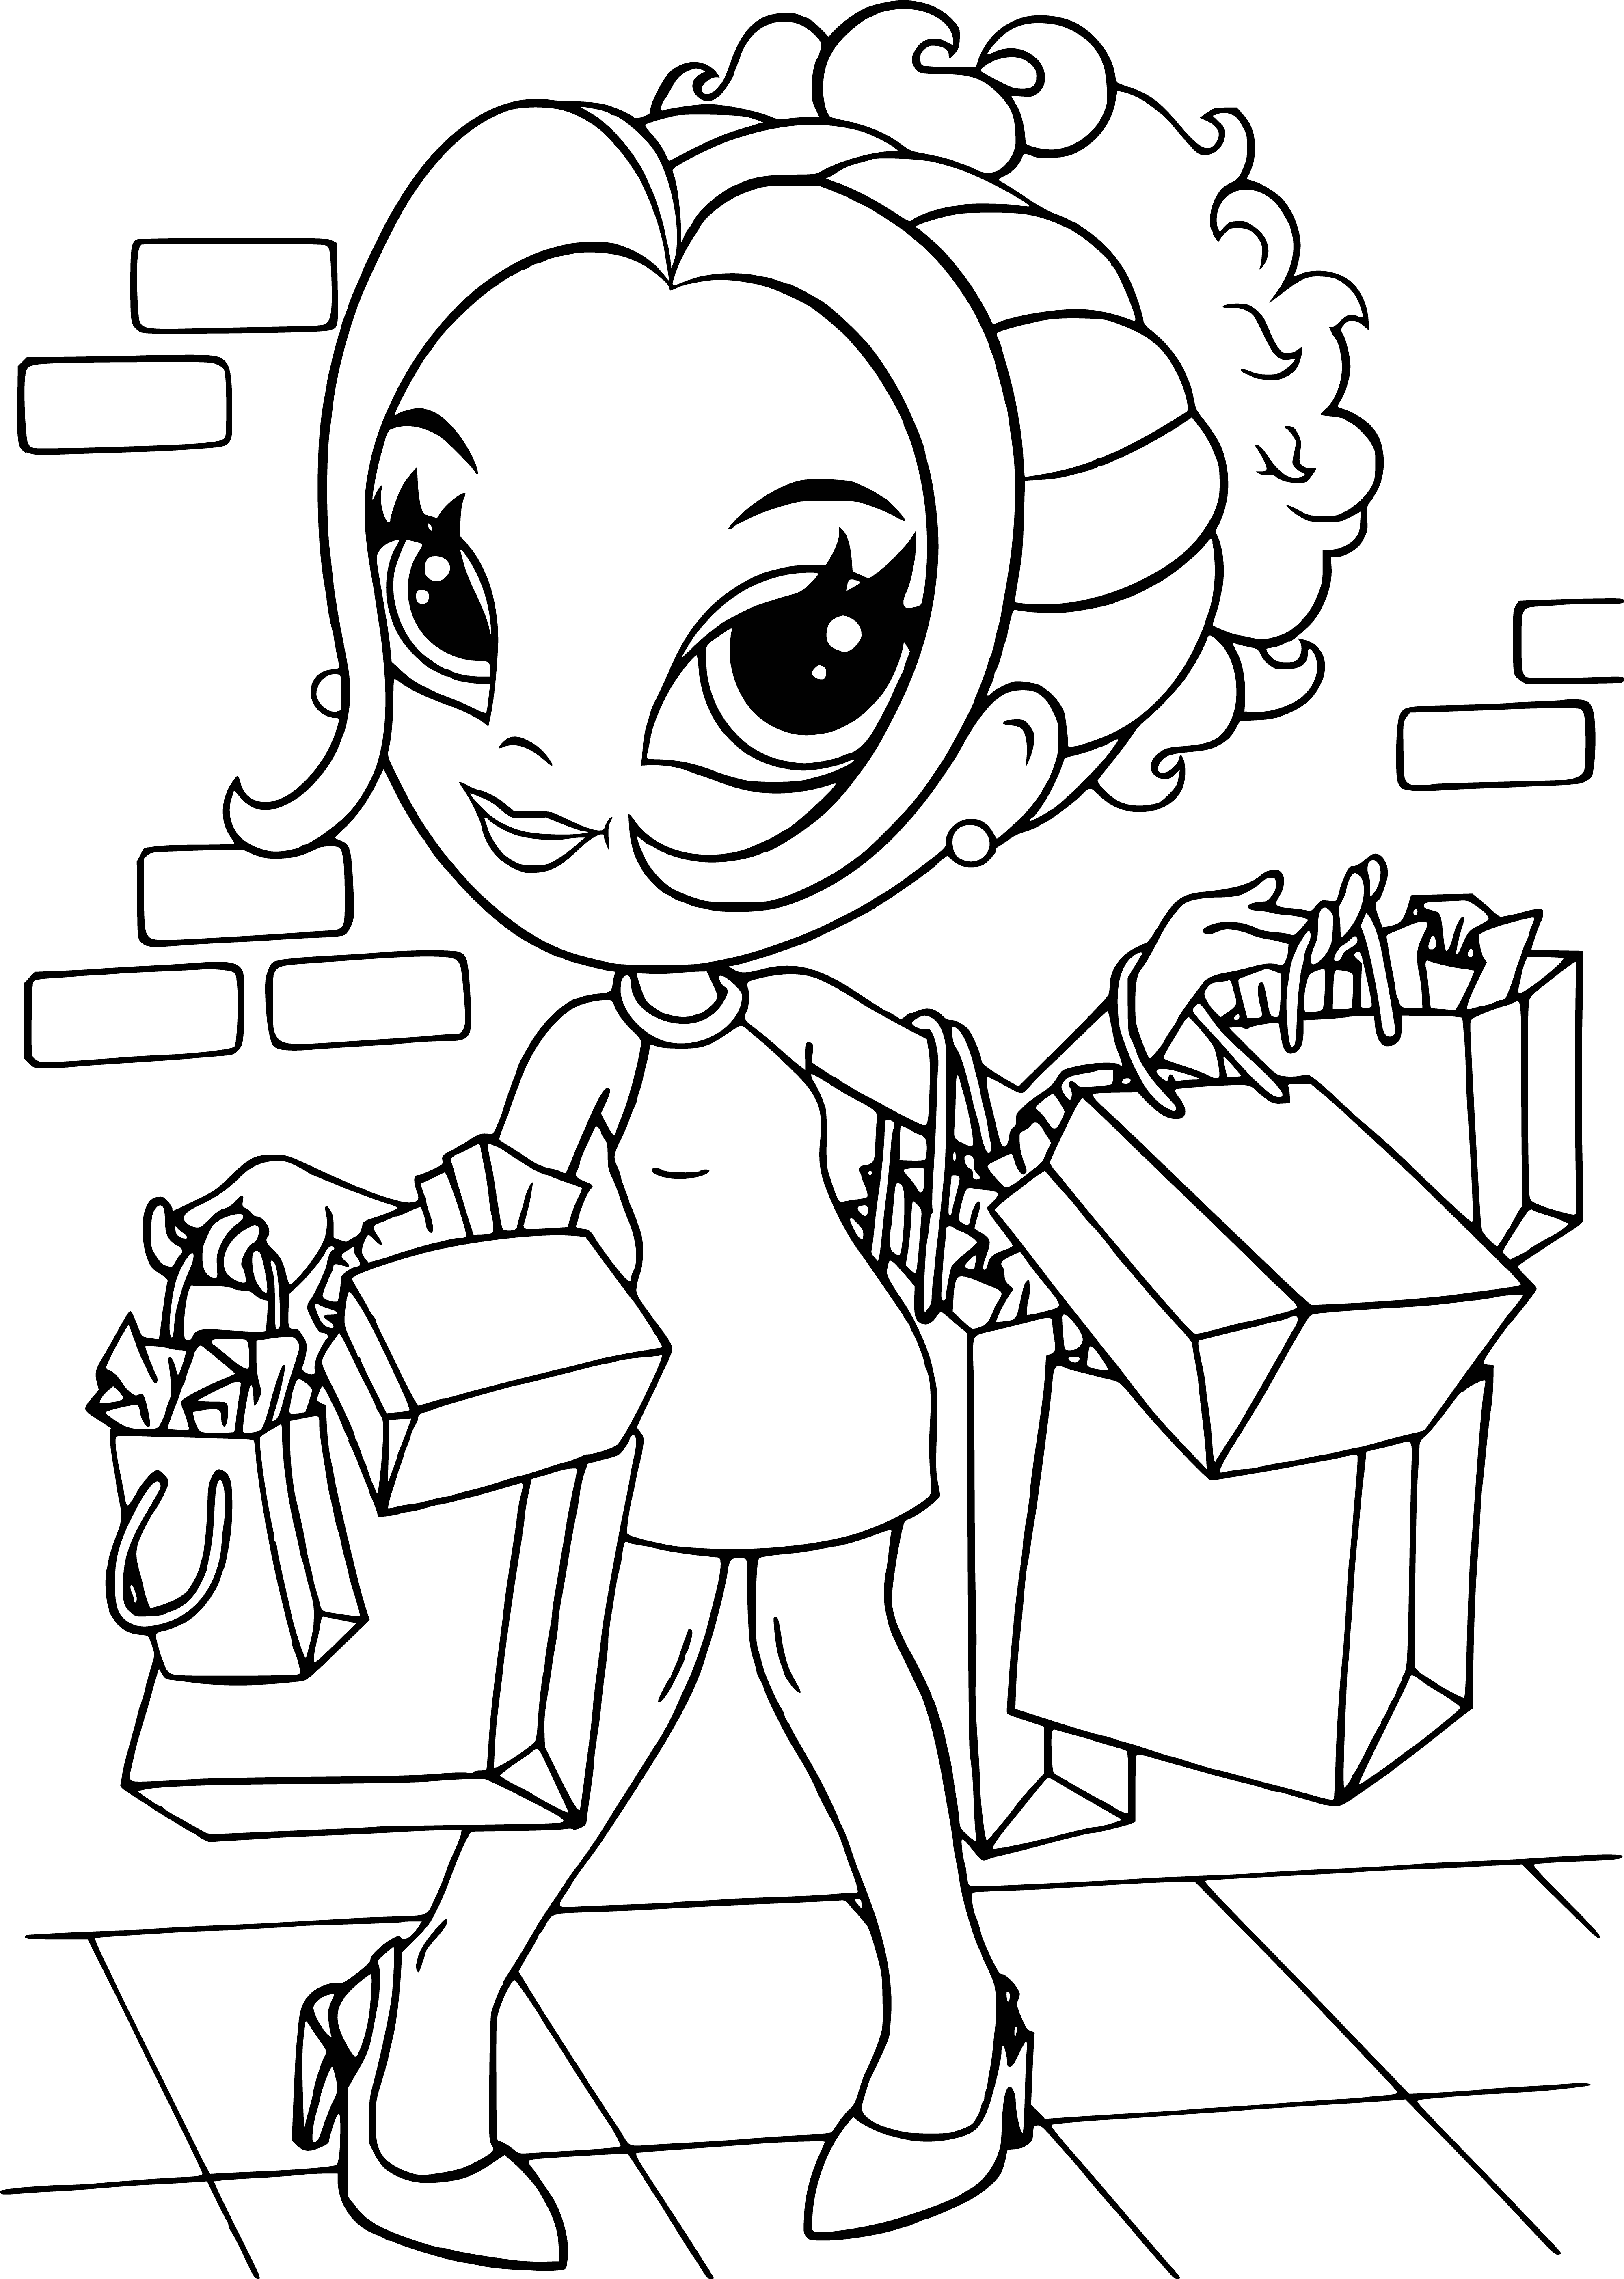 coloring page: Young woman in pink dress & ribbon puts on lipstick, stands in front of mirror w/ purse in hand. #makeupgoals